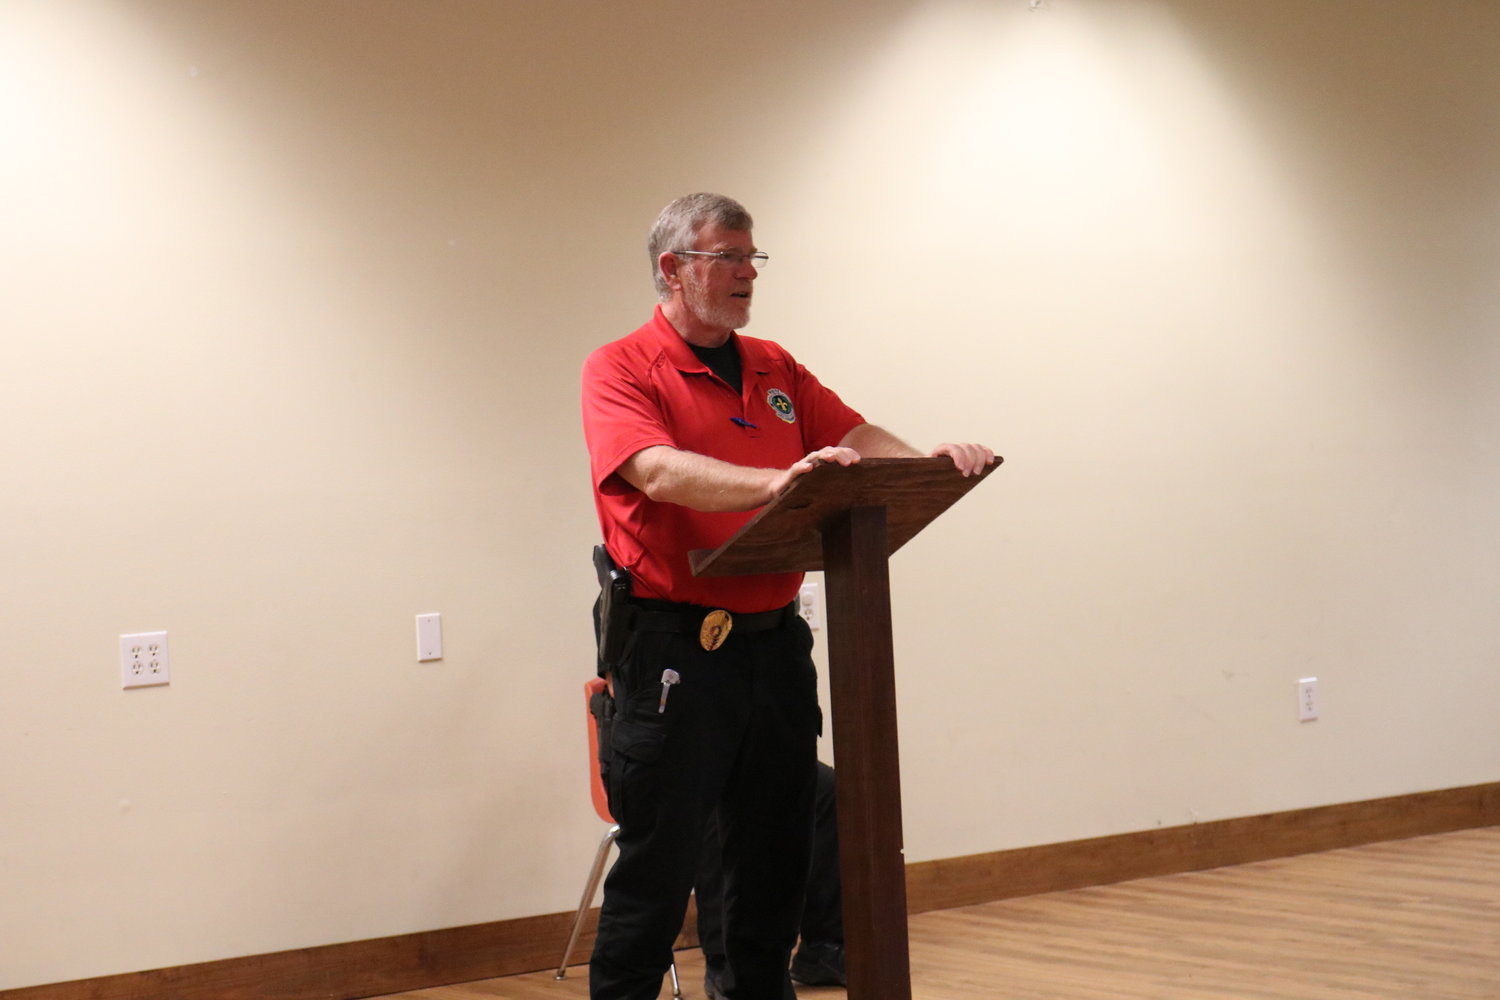 Elberta Police Chief Clif Roberts announced his retirement the Tuesday prior to the graduation ceremony. Presenting the academy graduates’ their certificates was his last official act as town police chief before he retired.